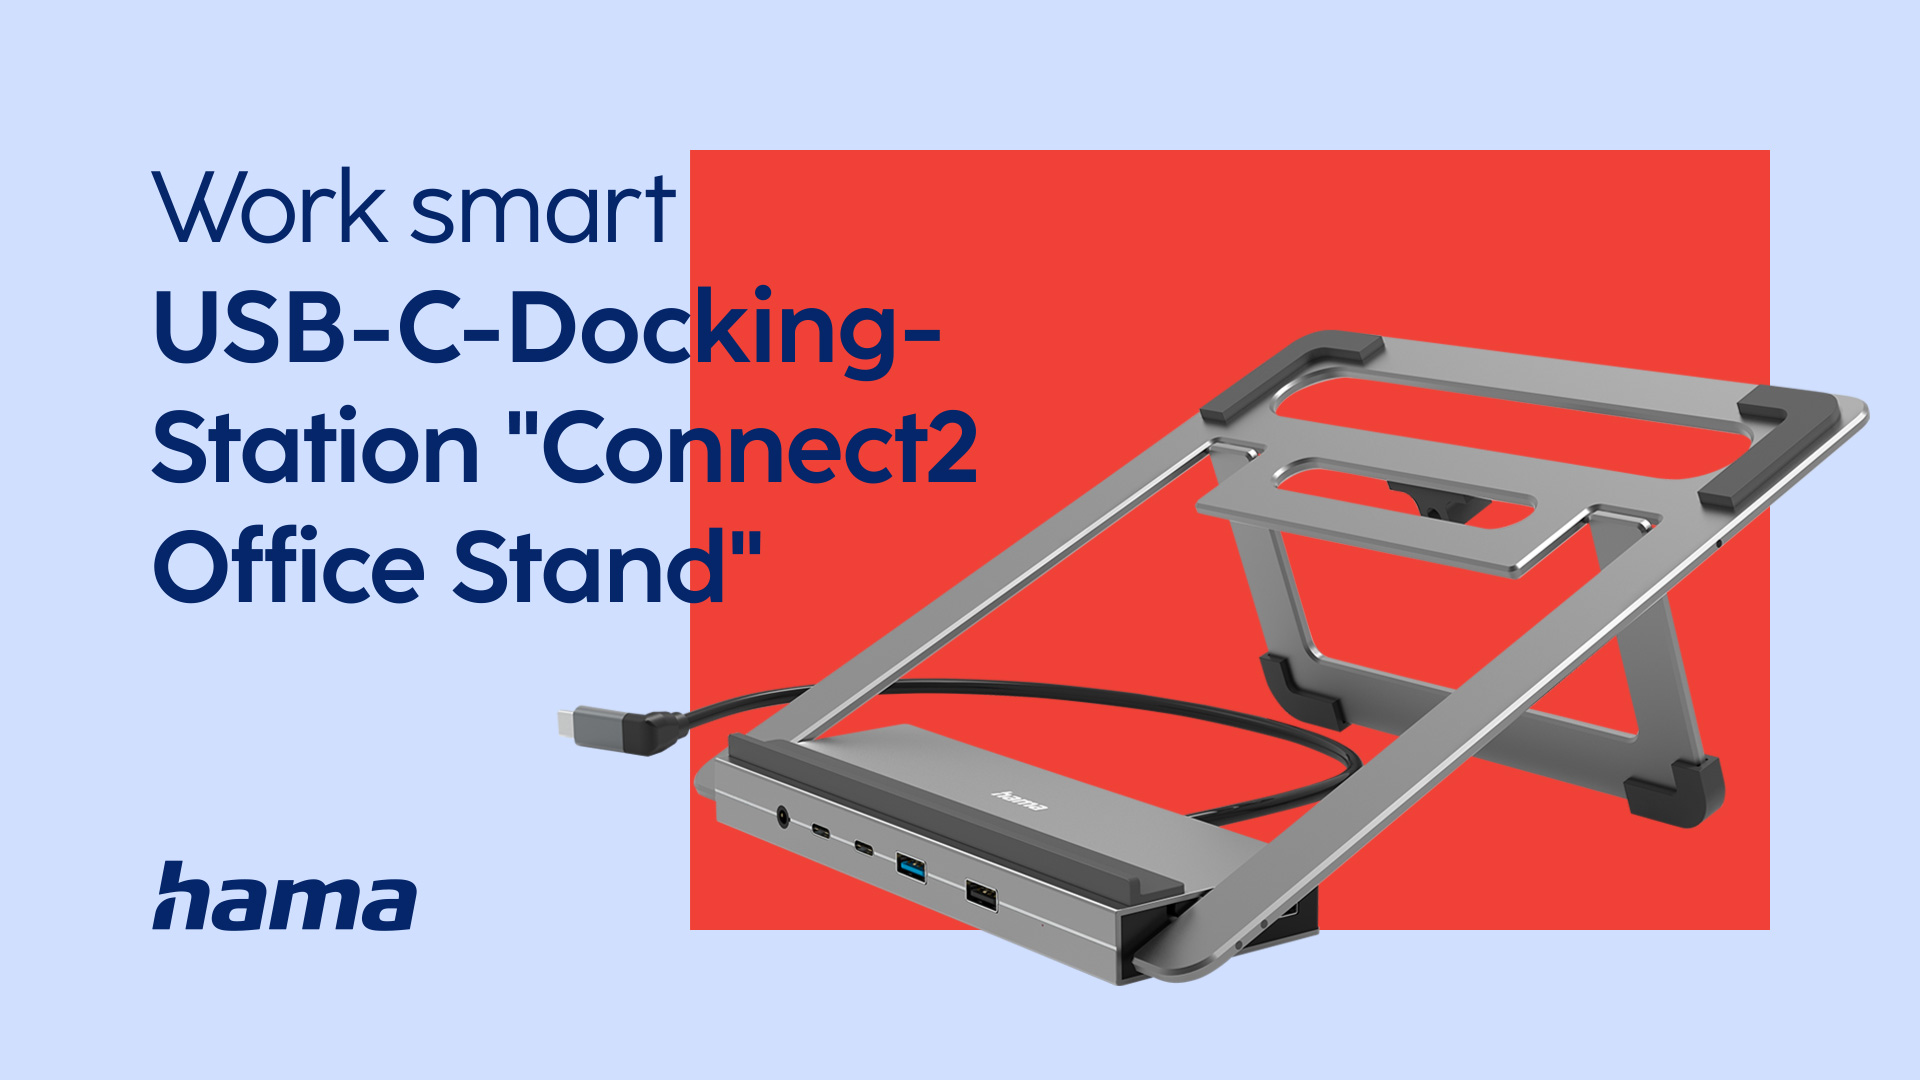 Hama USB-C-Docking-Station "Connect2Office Stand"